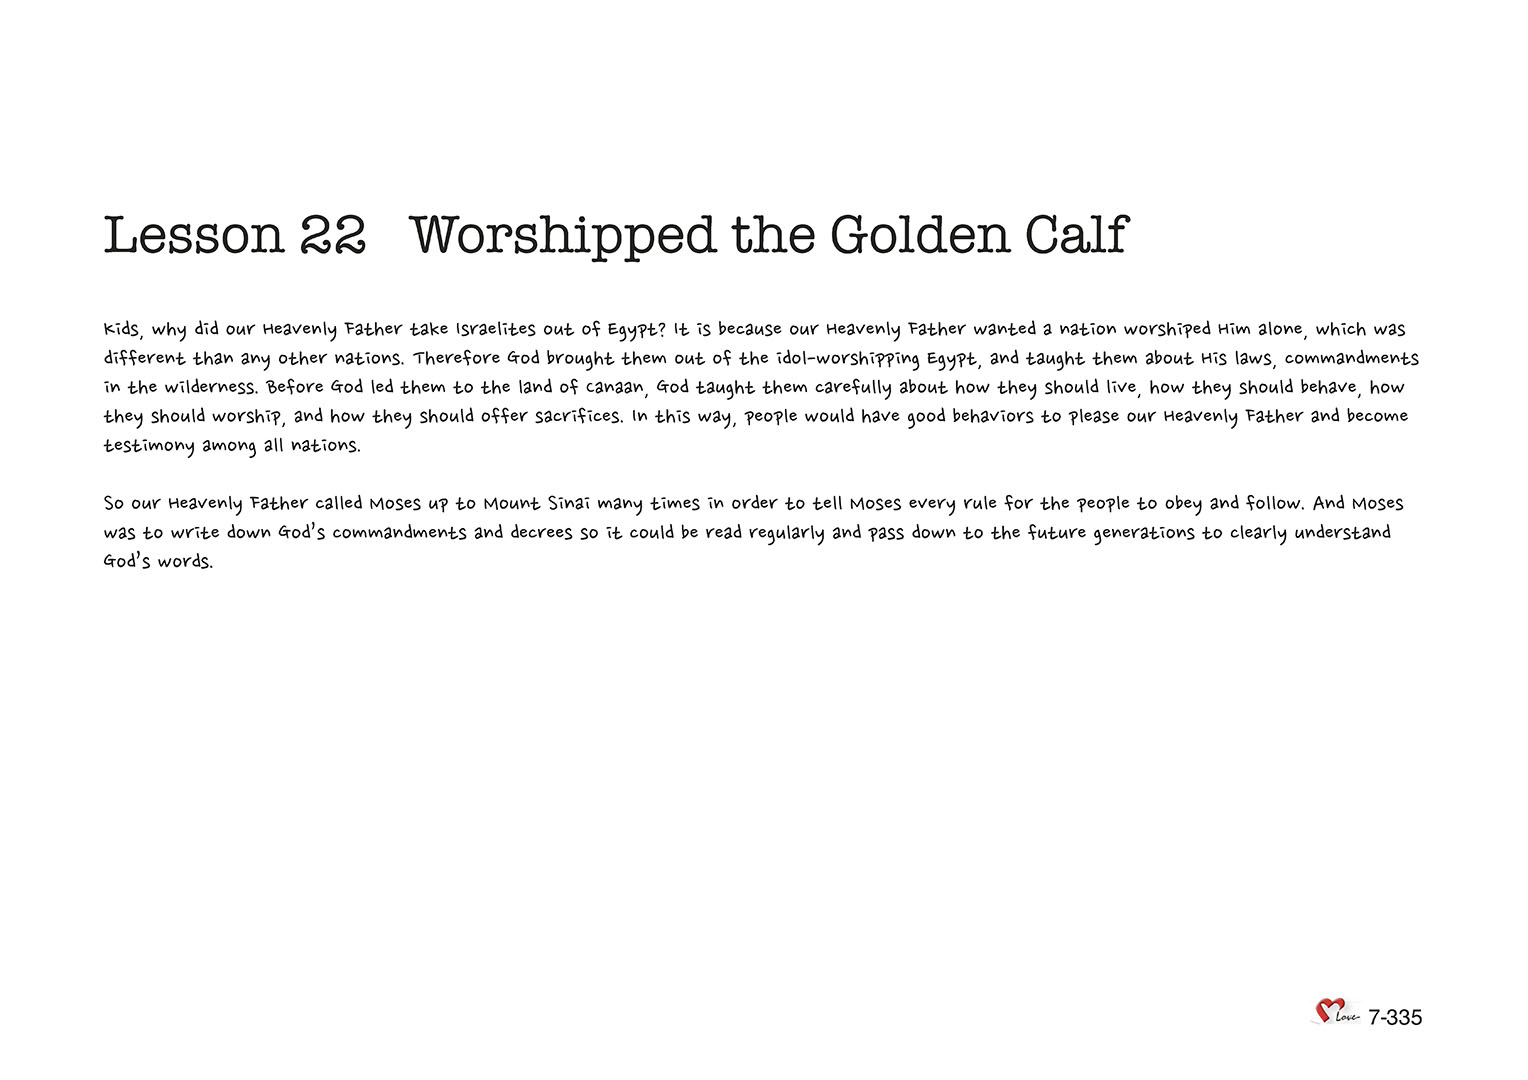 Chapter 7 - Lesson 22 - Worshipped the Golden Calf